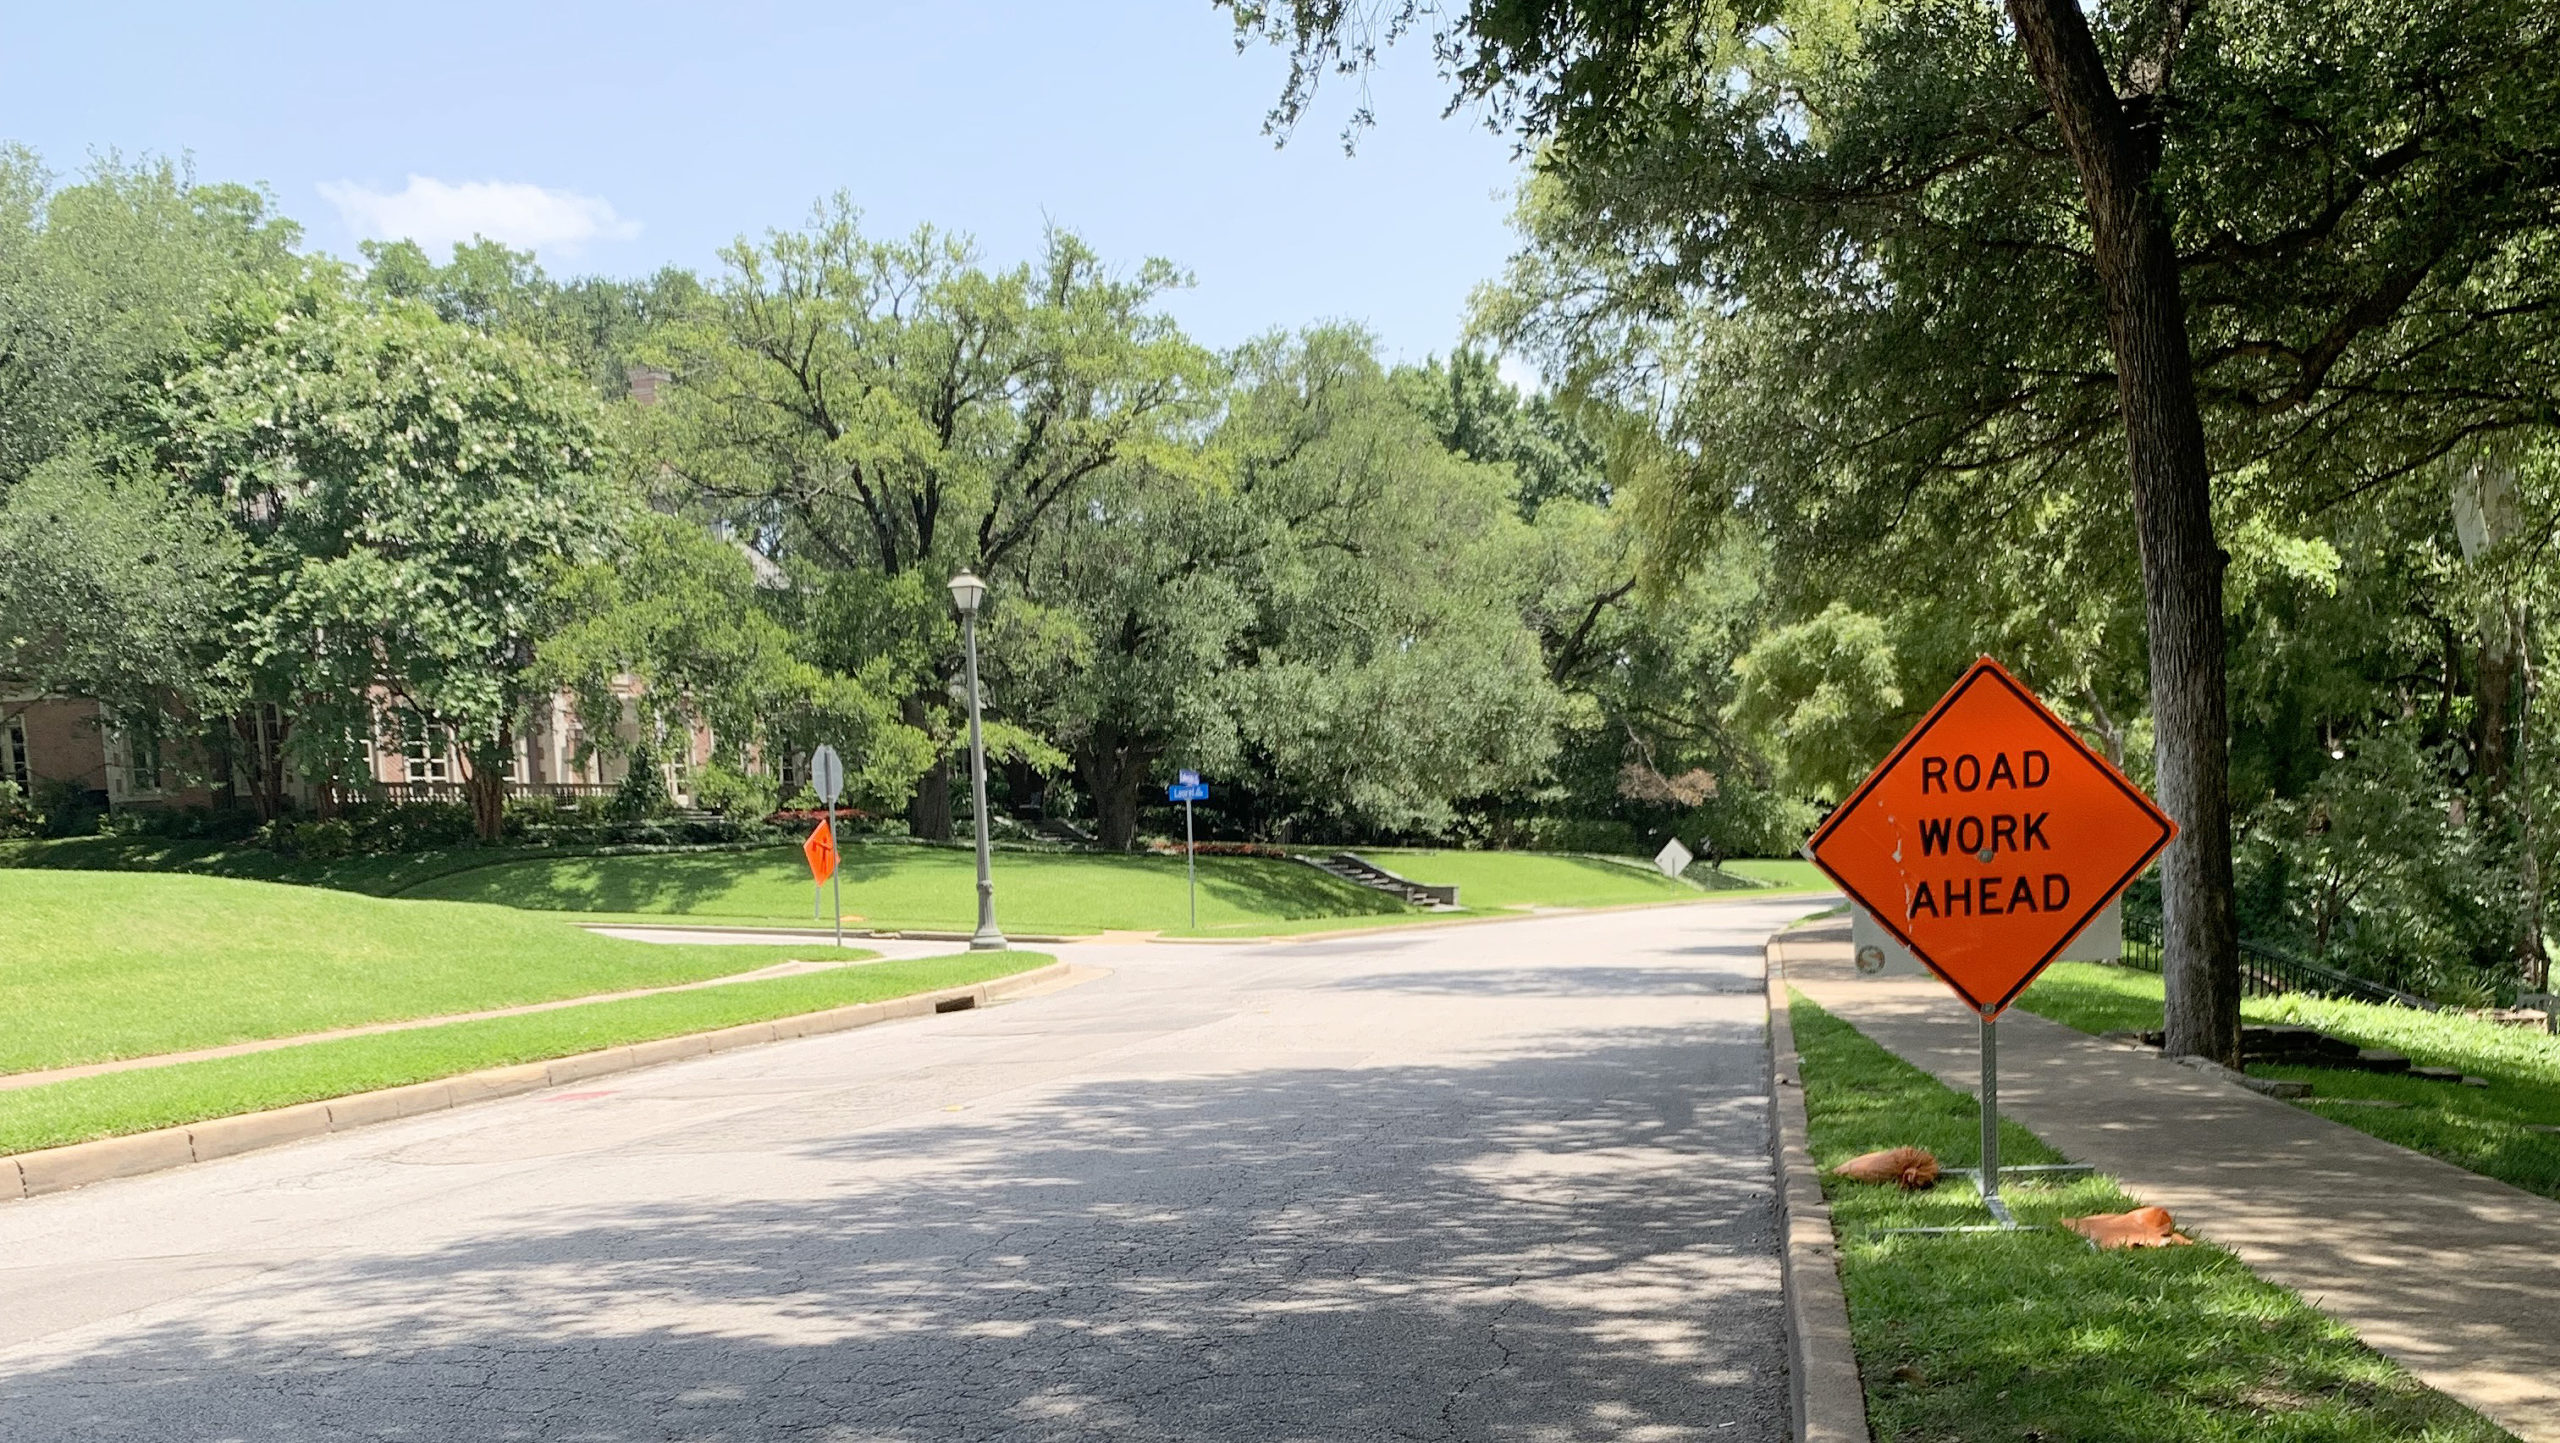 Street view of Lakeside drive with road work sign